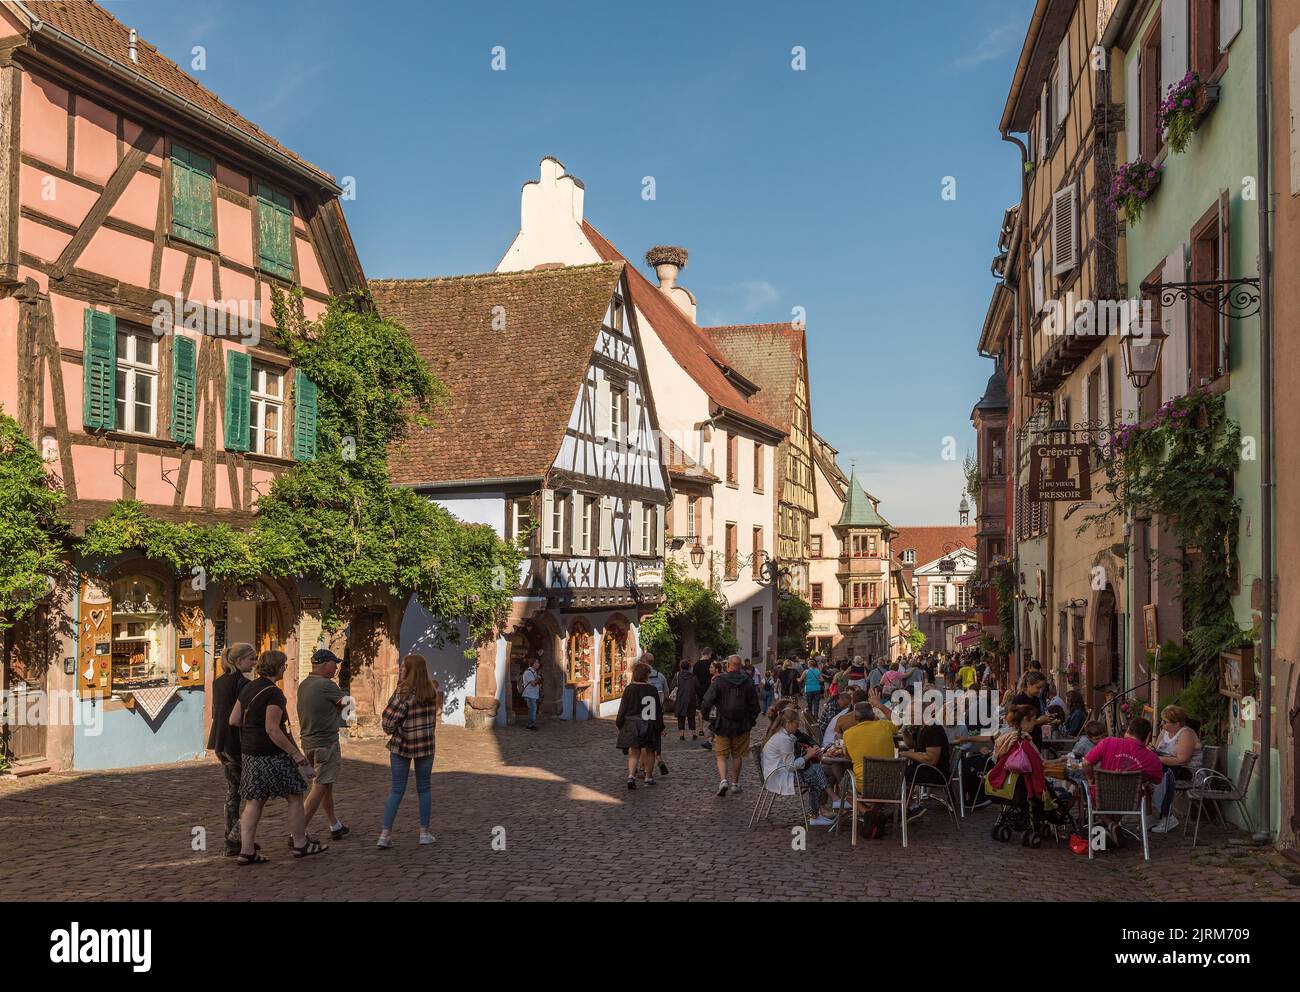 View along a street in the medieval village of Riquewihr, Alsace, France Stock Photo